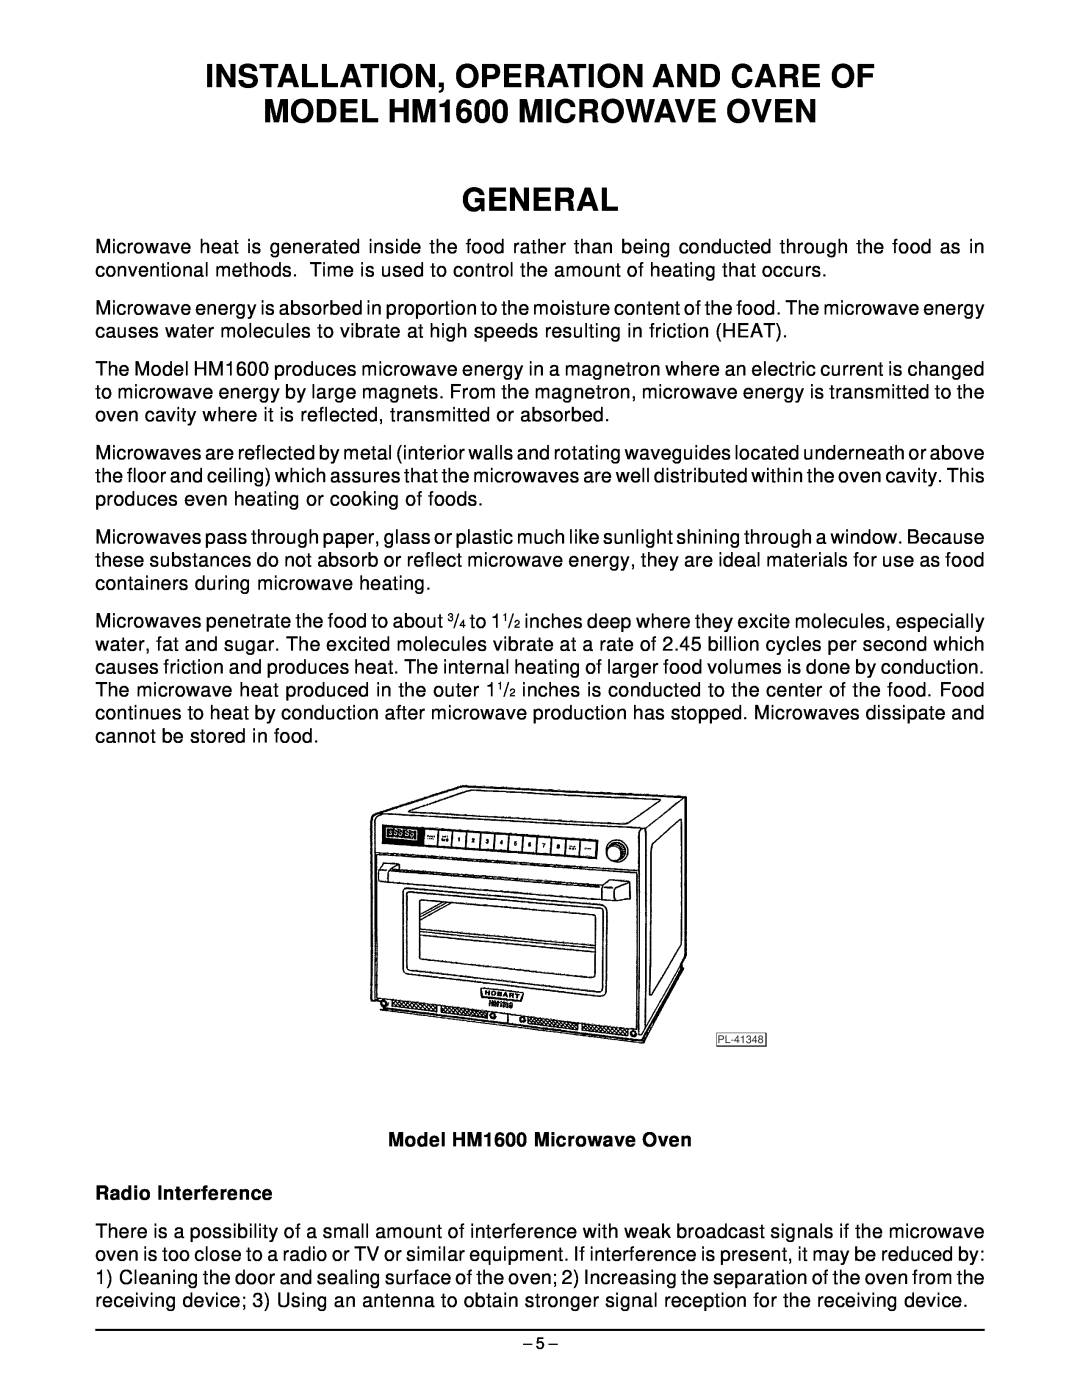 Hobart manual Installation, Operation And Care Of, MODEL HM1600 MICROWAVE OVEN GENERAL 